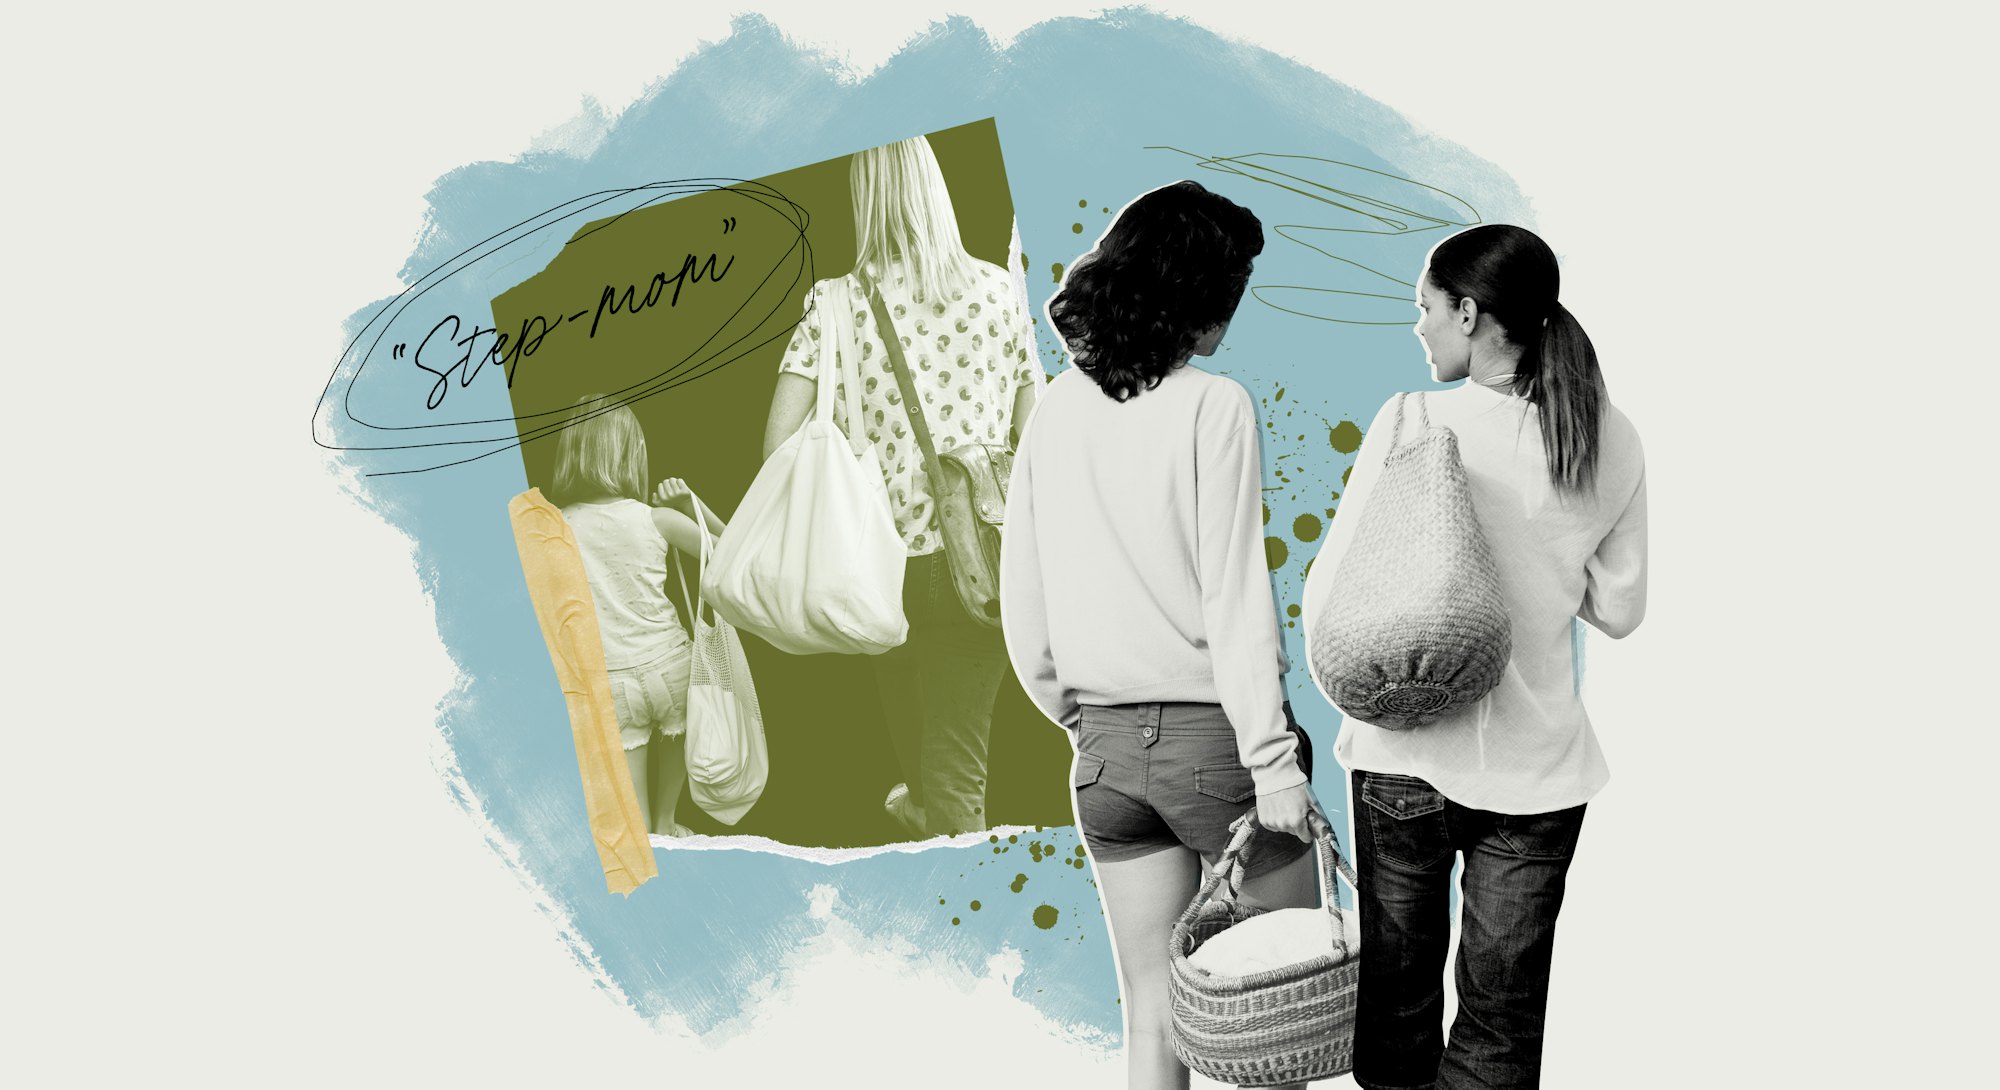 A collage: Two women carrying groceries while walking, and a stepmom with her daughter also carrying...